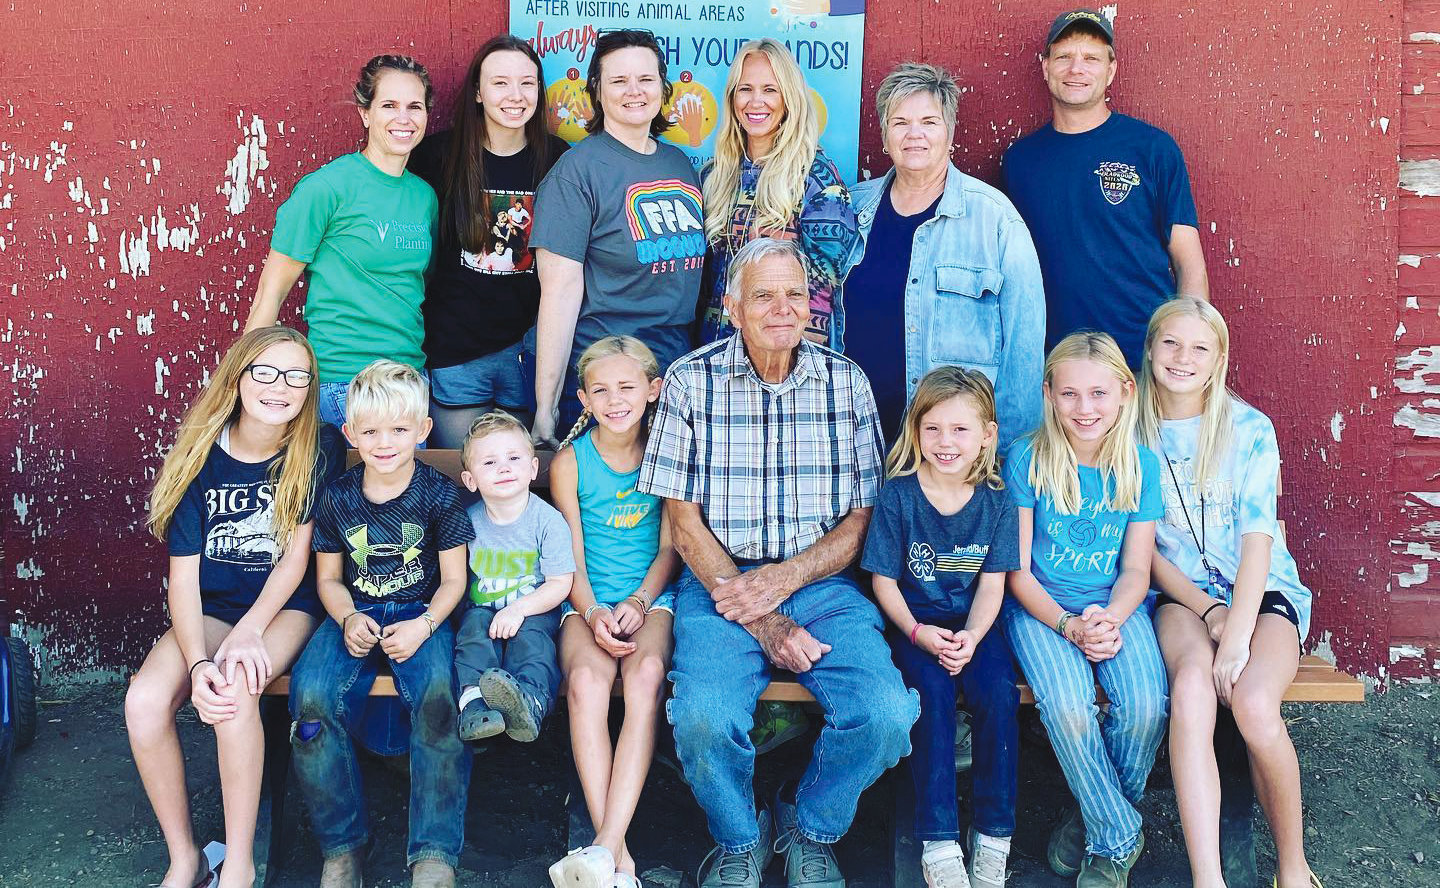 The Clendening family at the South Dakota State Fair.